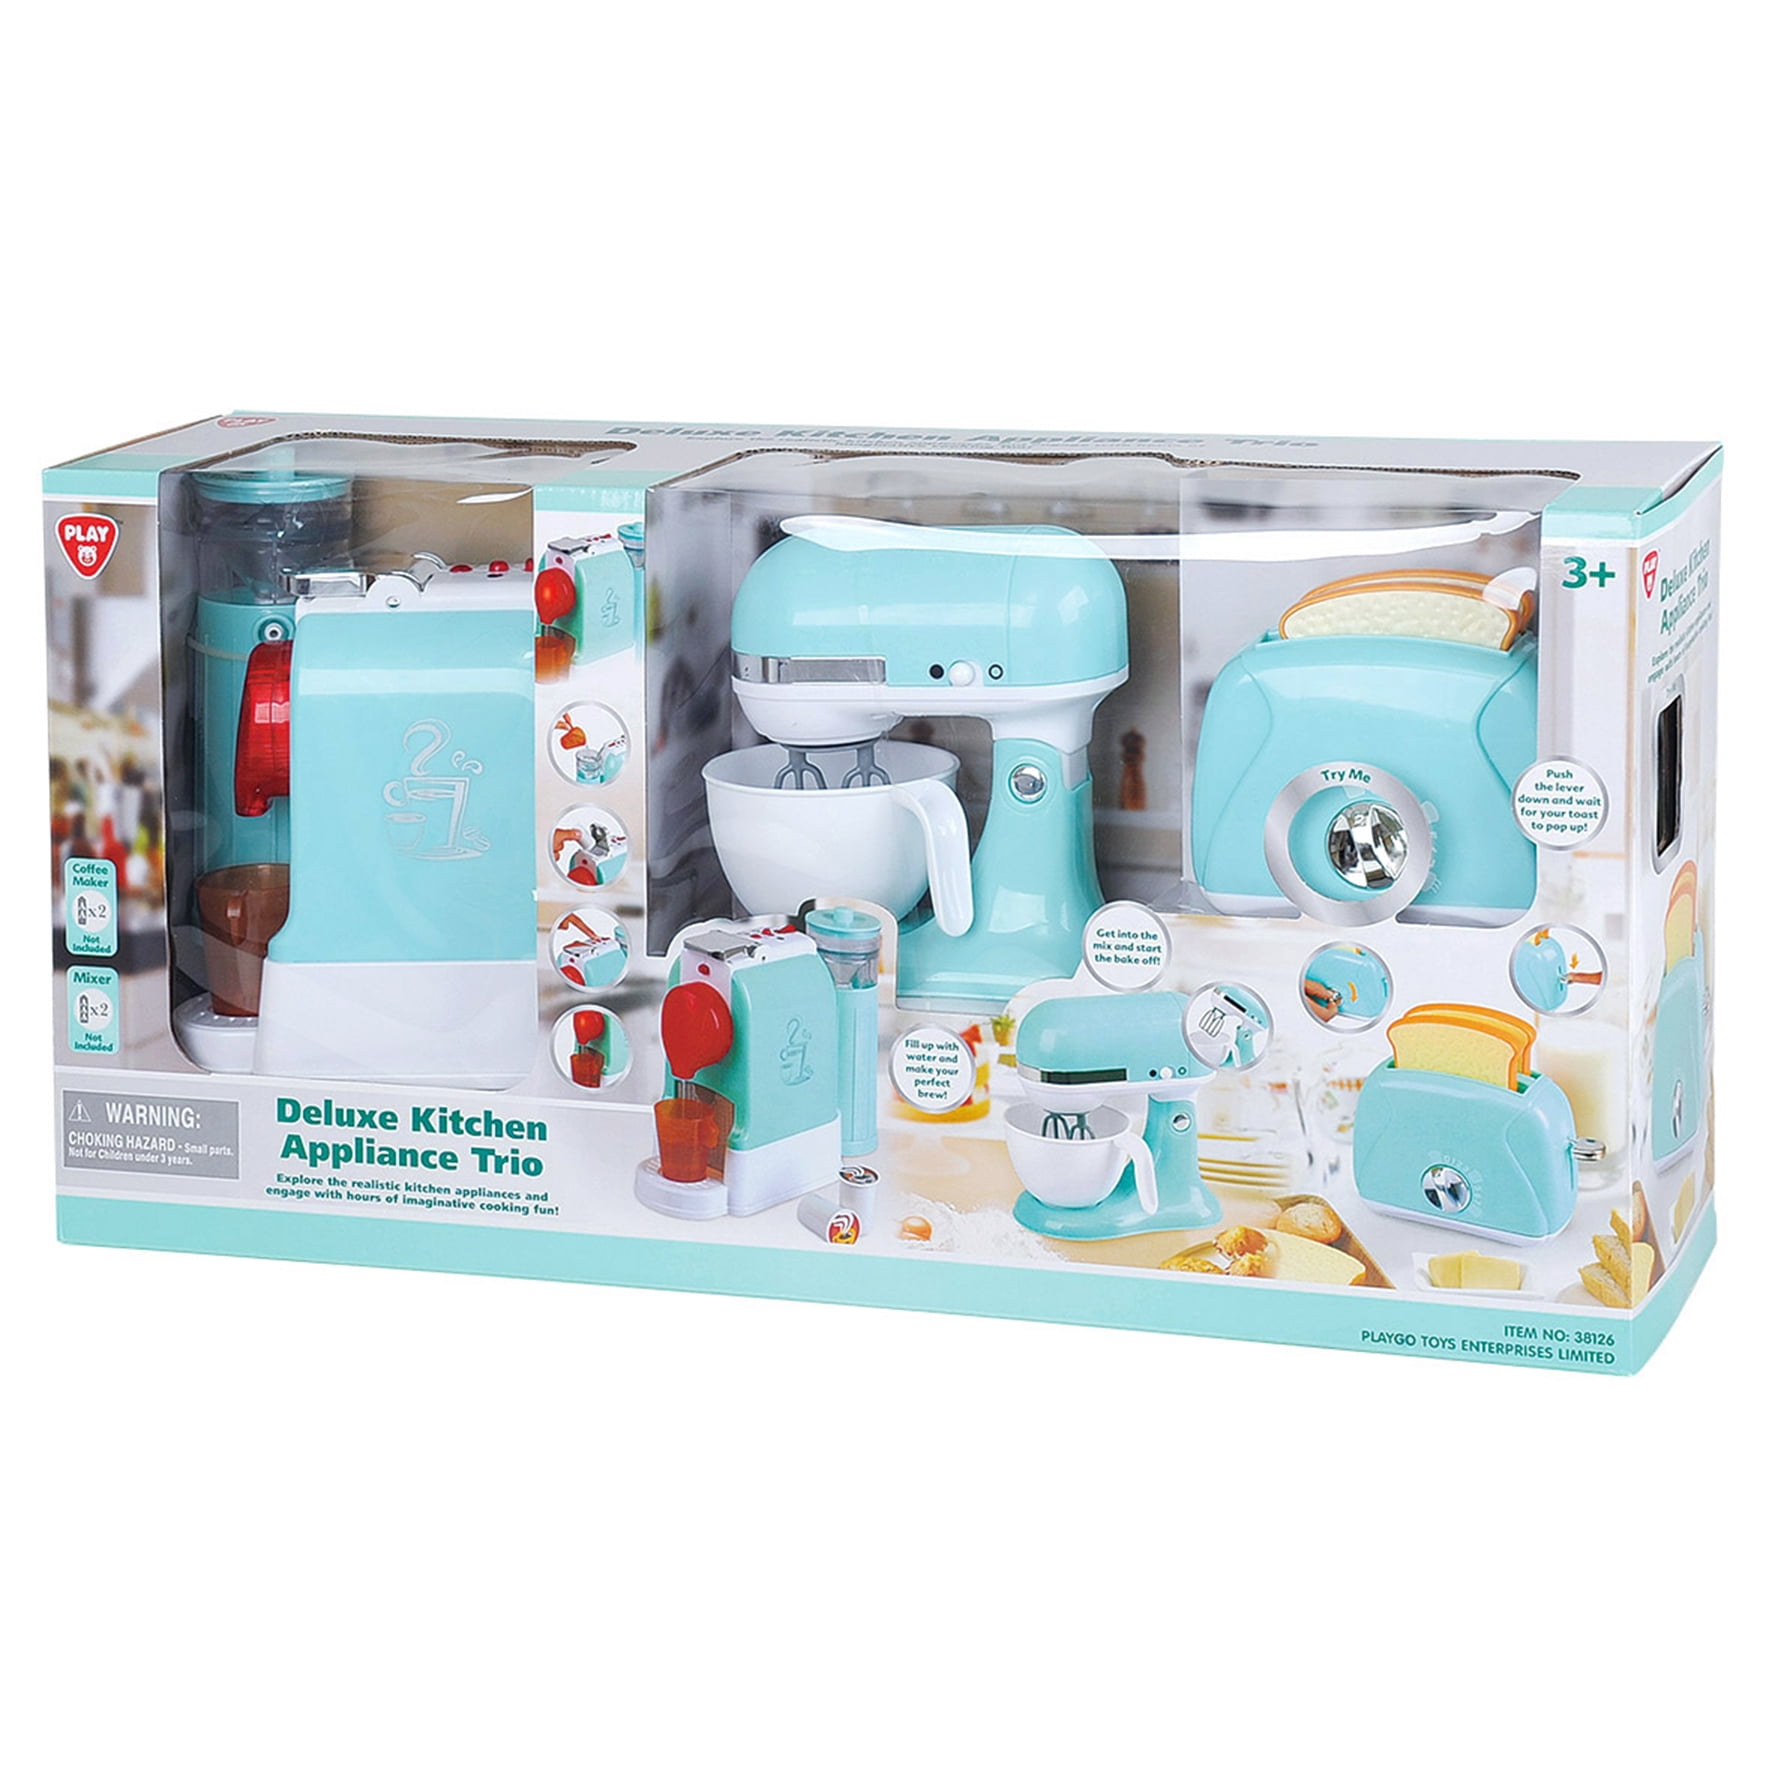 NEW MY FIRST KITCHEN APPLIANCES KIDS PLAY HOME ROLE PLAY PRETEND TOY ACCESSORIES 